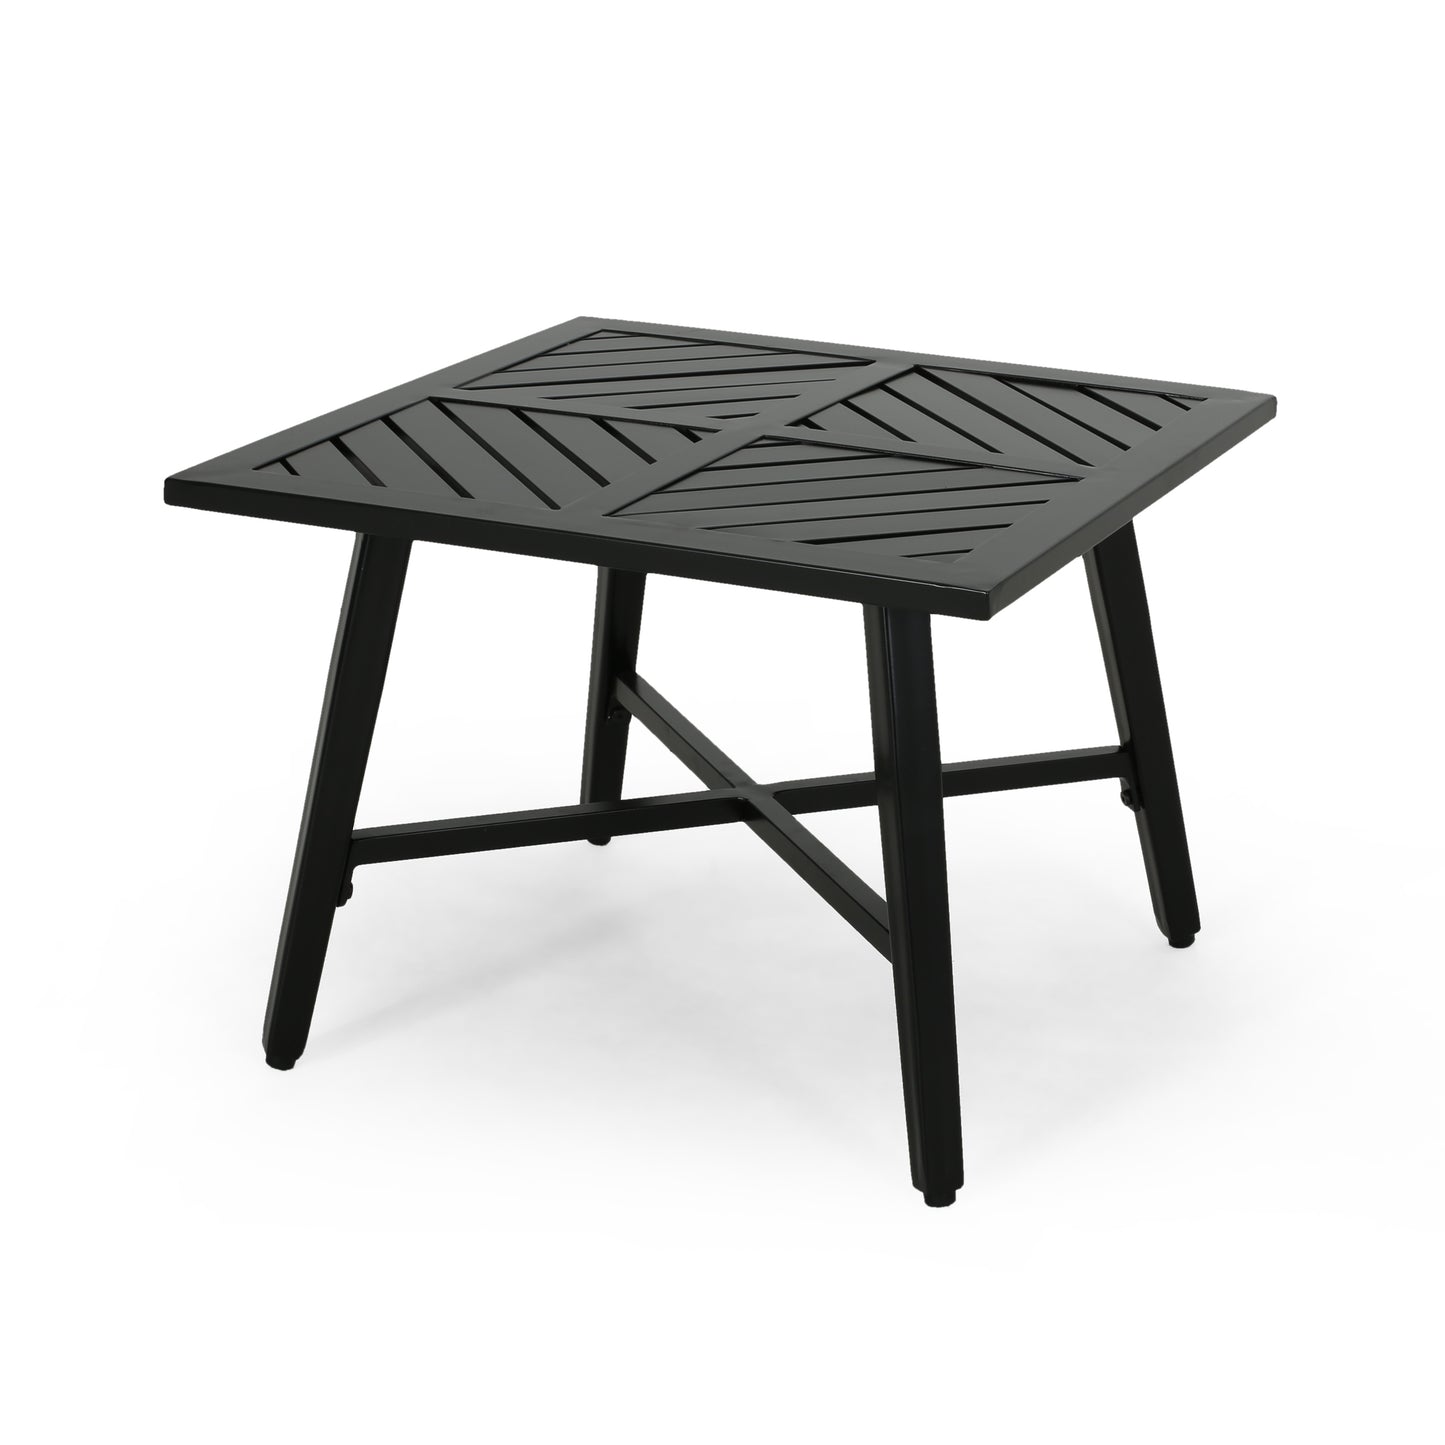 Carlson Diego Outdoor Aluminum Side Table, Matte Black